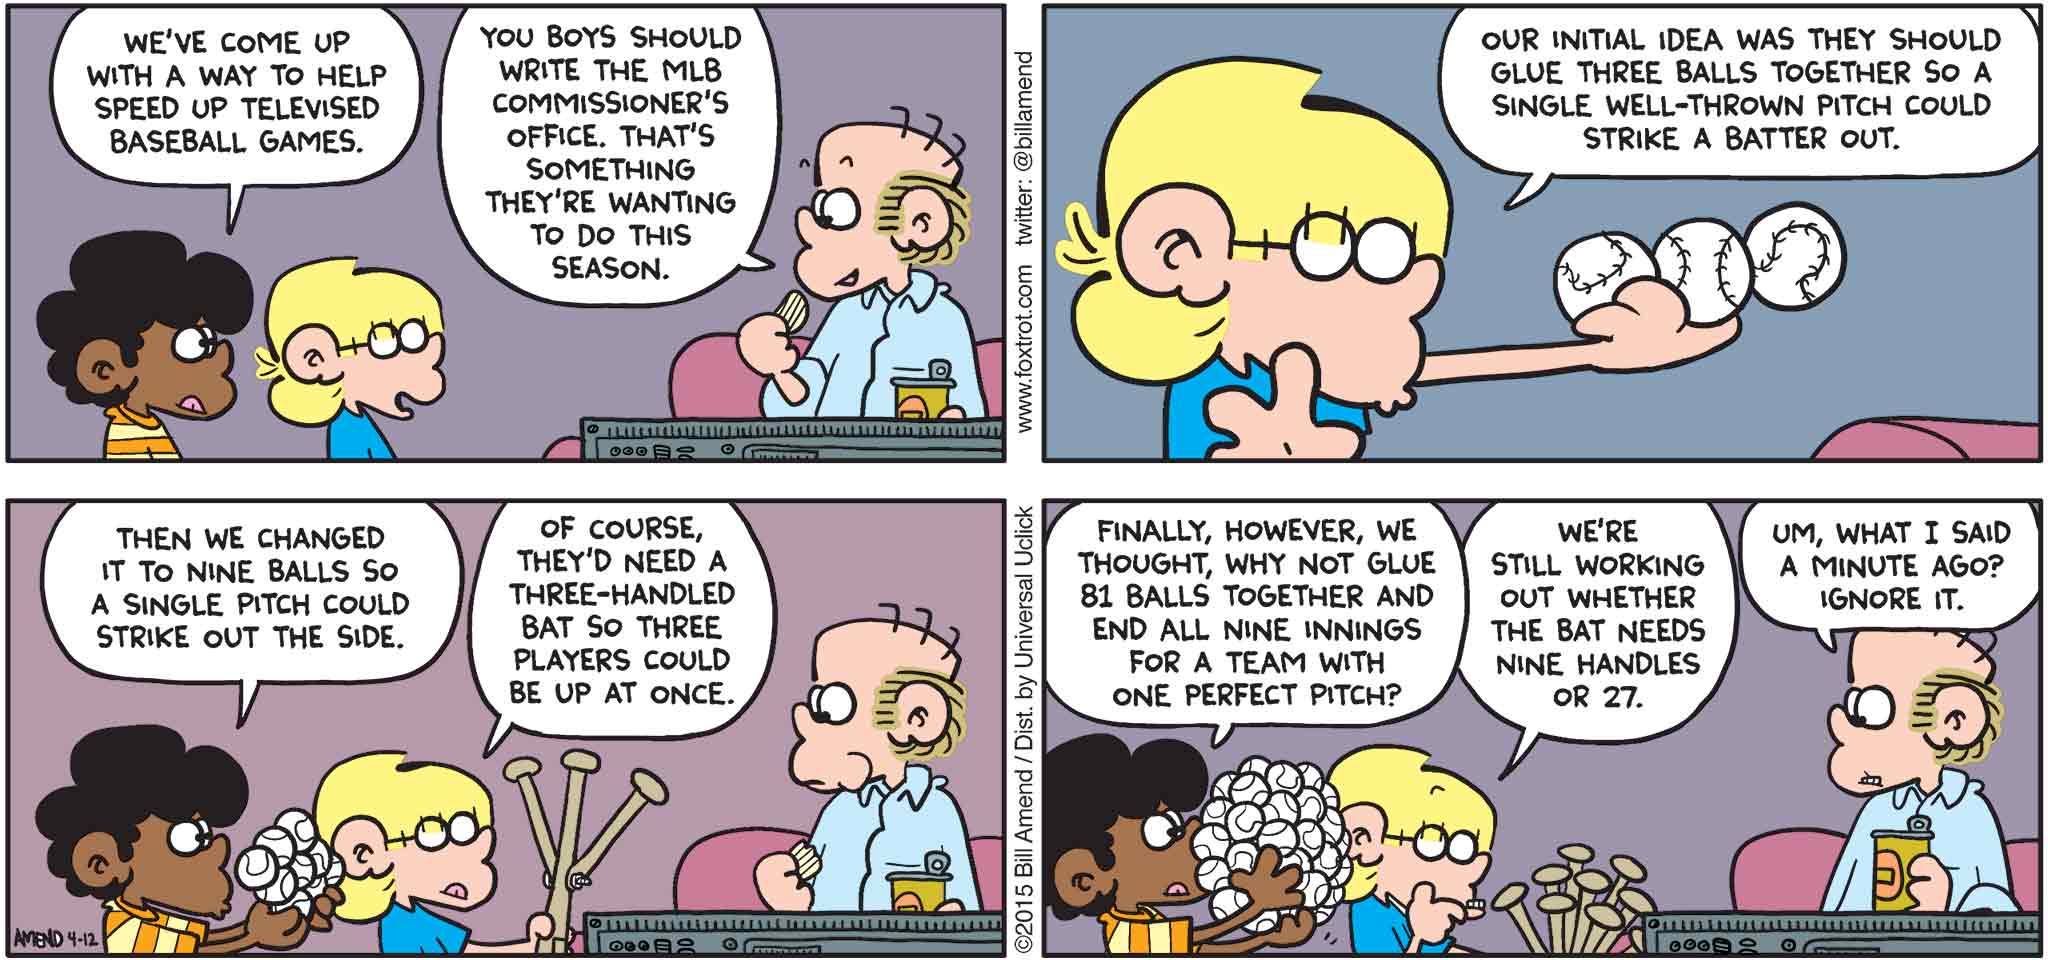 FoxTrot by Bill Amend - "Speedball" published April 12, 2015 - Marcus: We've come up with a way to help speed up televised baseball games. Roger: You boys should write the MLB commissioner's office. That's something they're wanting to do this season. Jason: Our initial idea was they should glue three balls together so a single well-thrown pitch could strike a batter out. Marcus: Then we changed it to nine balls so a single pitch could strike out the side. Jason: Of course, they'd need a three-handled bat so three players could be up at once. Marcus: Finally, however, we thought, why not glue 81 balls together and end all nine innings for a team with one perfect pitch? Jason: We're still working out whether the bat needs nine handles or 27. Roger: Um, what I said a minute ago? Ignore it. 